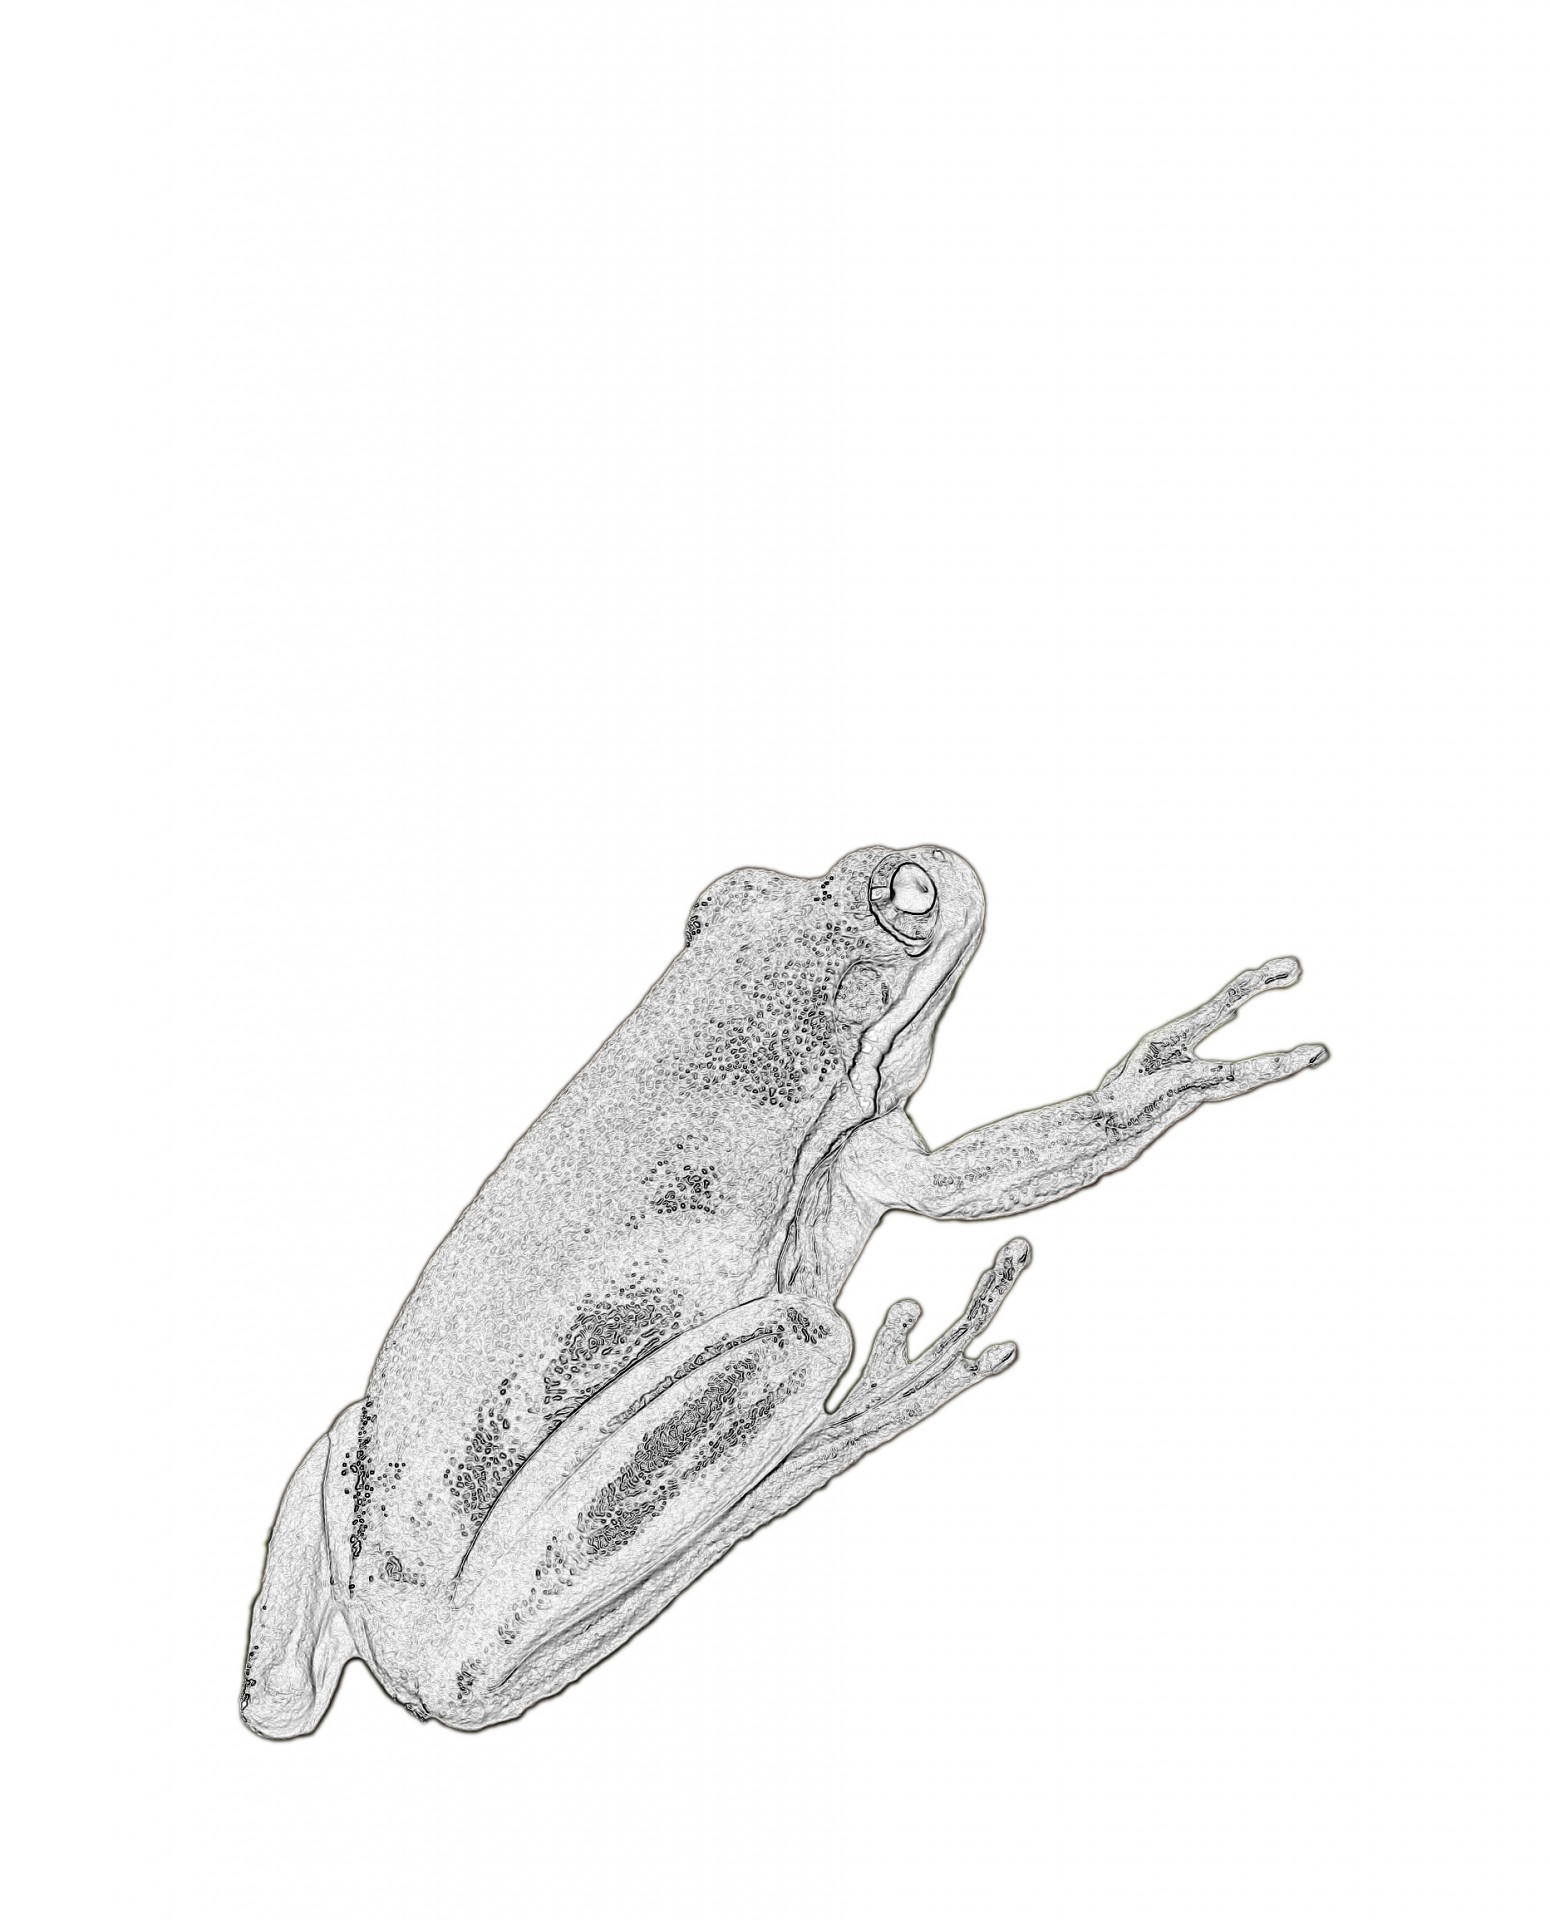 Cute black and white frog illustration clipart for scrapbooking